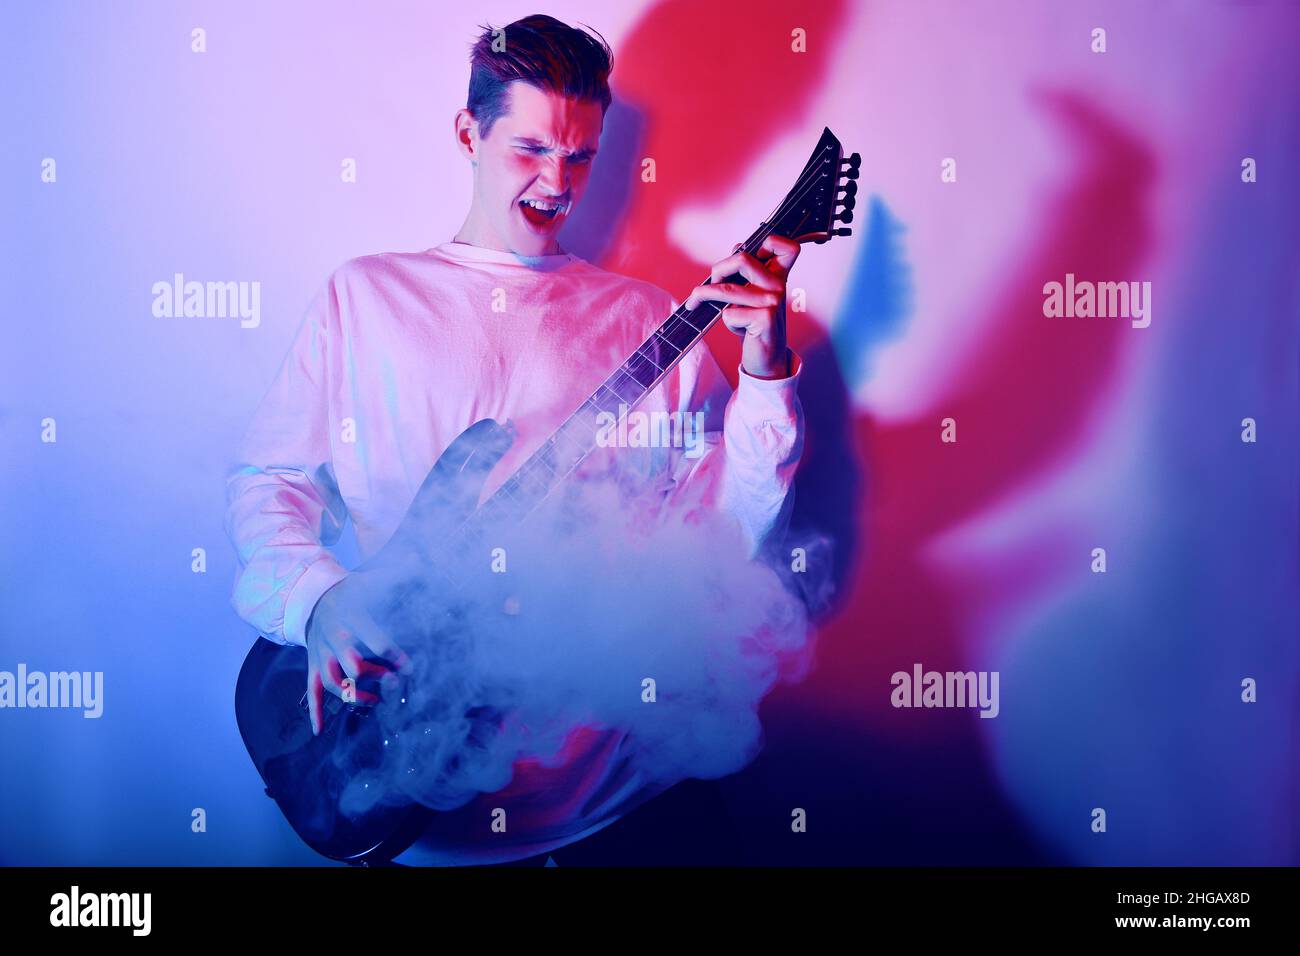 Portrait of young man artist singing, screaming, playing electric guitar Hobby, music concept. Rock Star neon light photo. Stock Photo